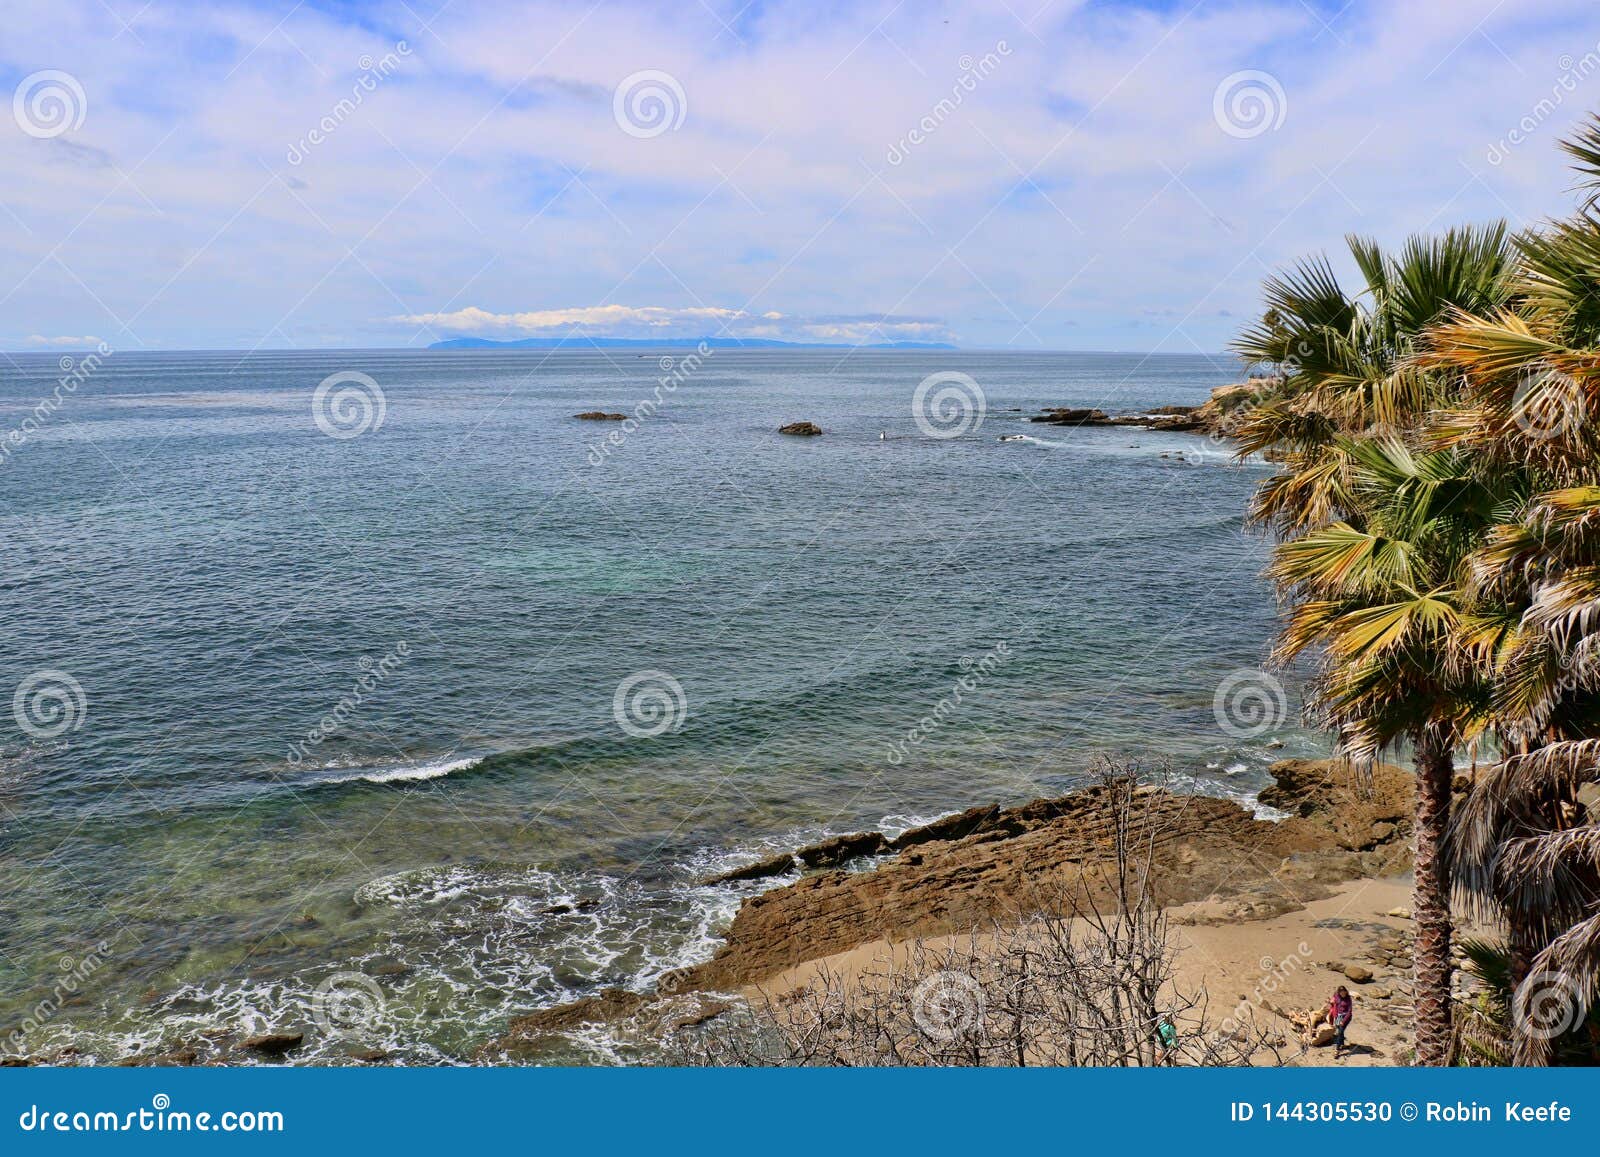 Tall Palm Trees And Bushes Near The Ocean And Beach Stock Photo - Image of calm, seascape: 144305530